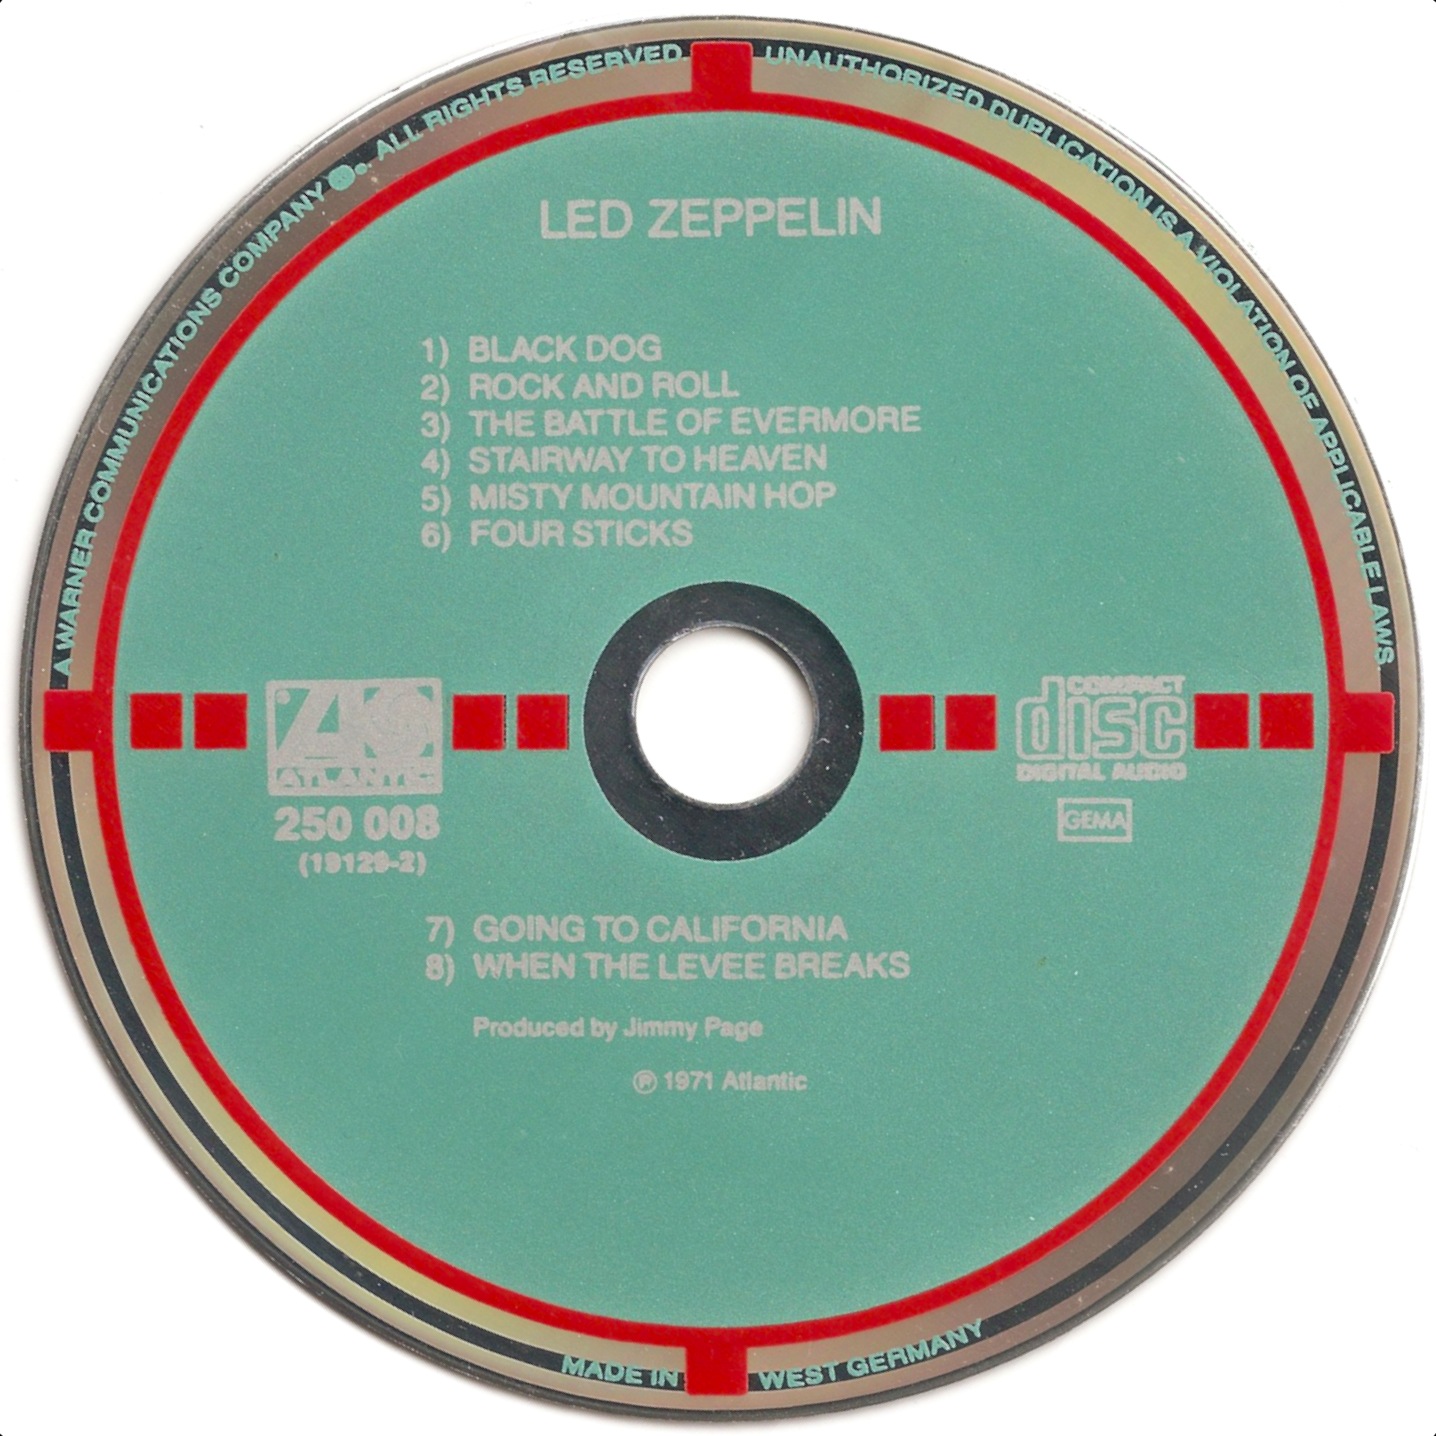 The Target CD Collection: Led Zeppelin